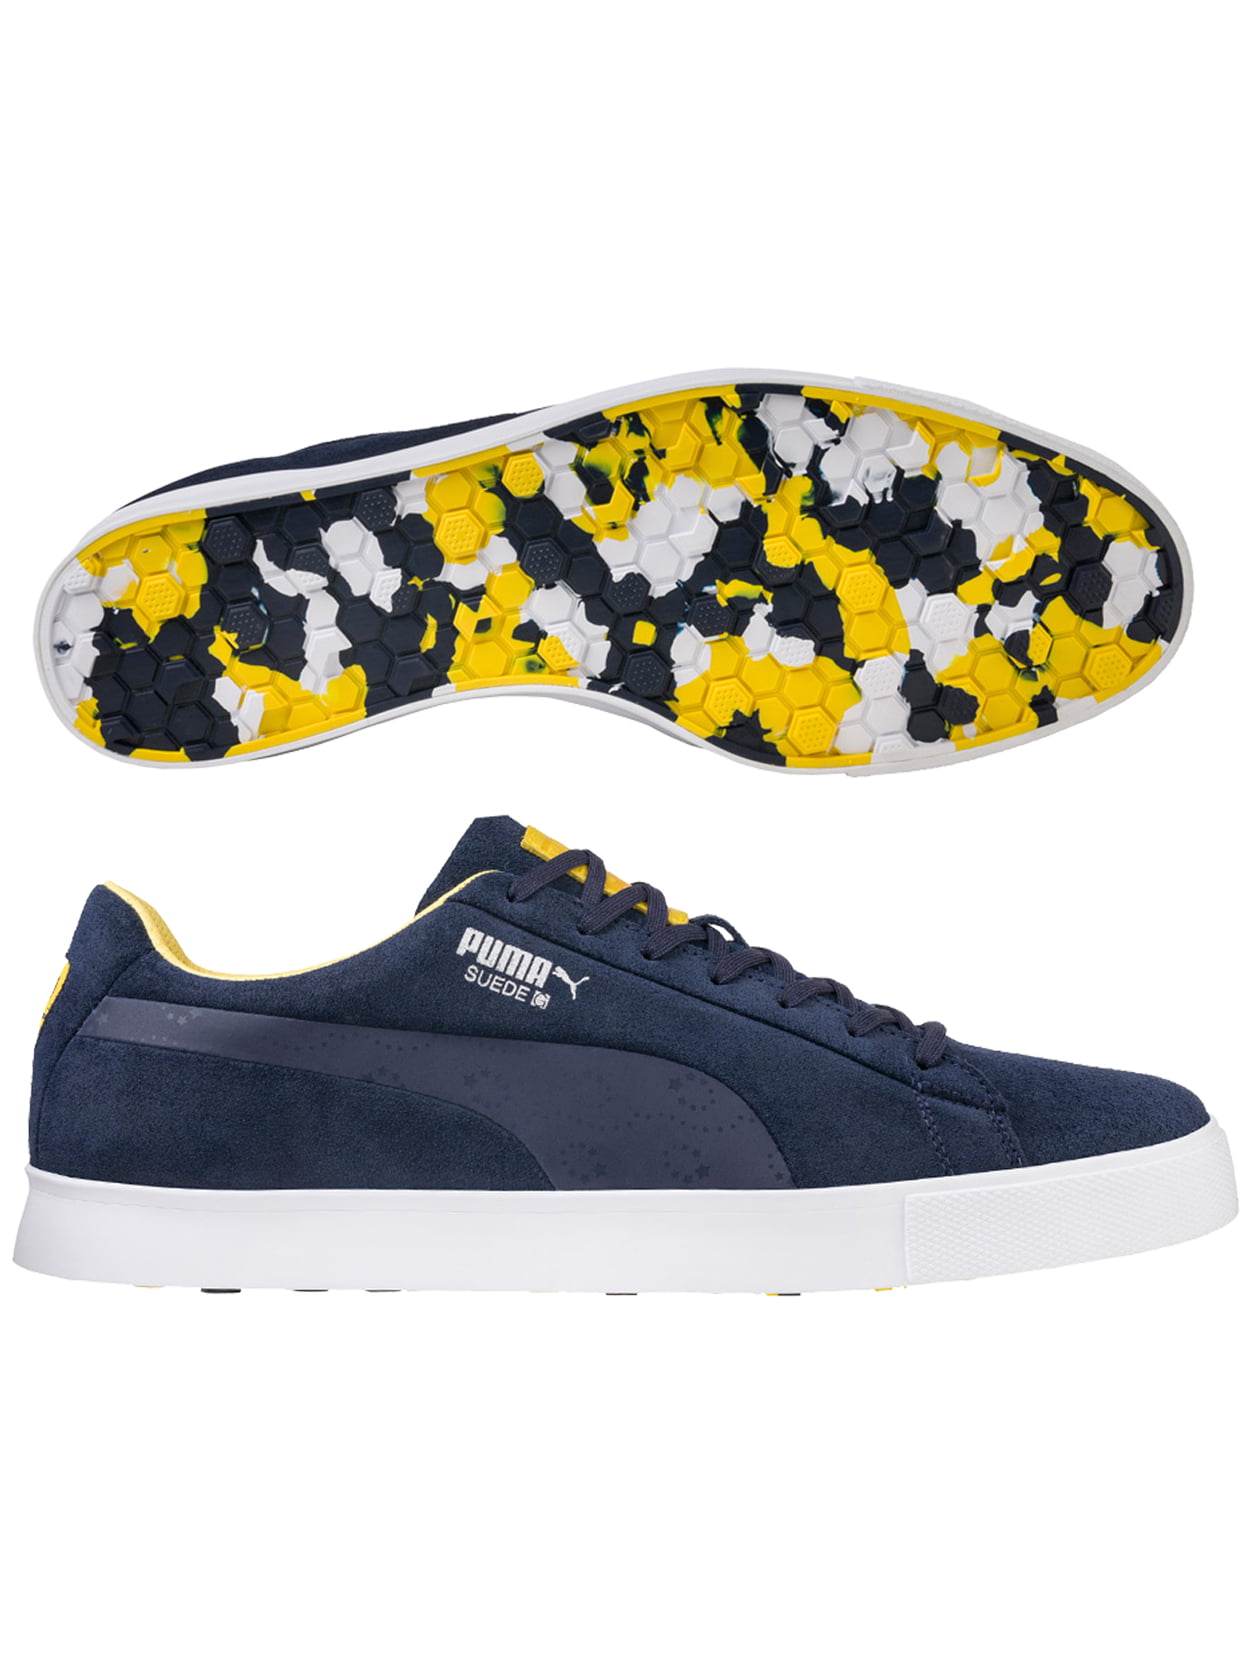 puma ryder cup shoes